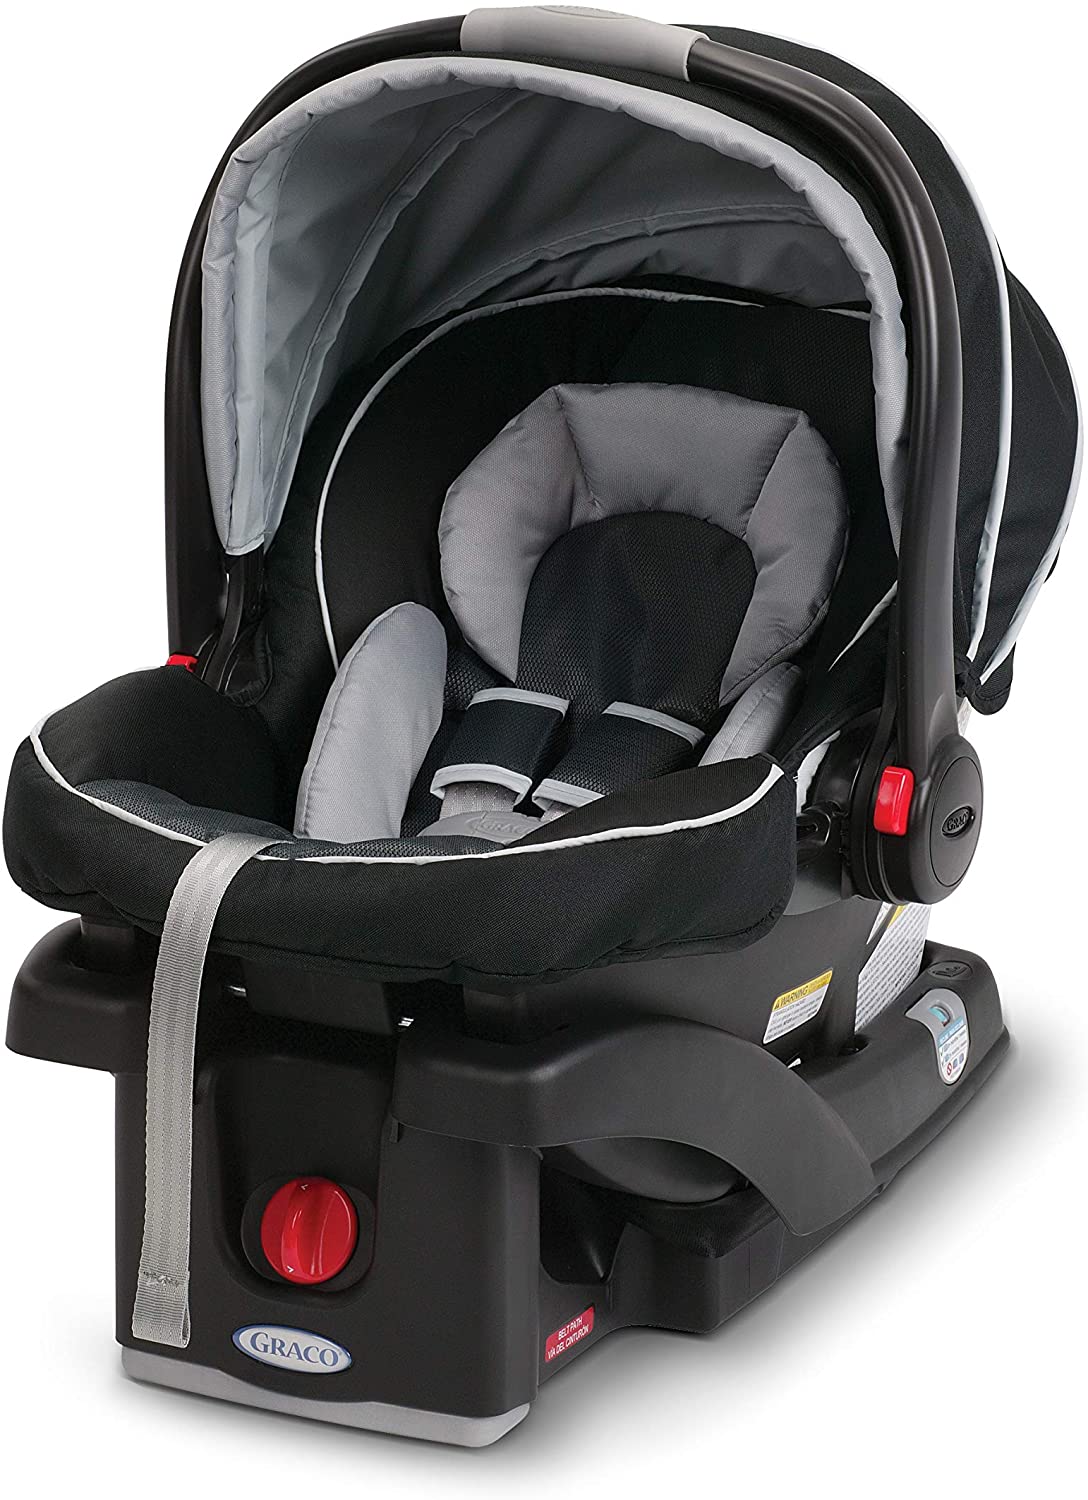 Best Infant Car Seats Reviews - Safety Ratings For 2021